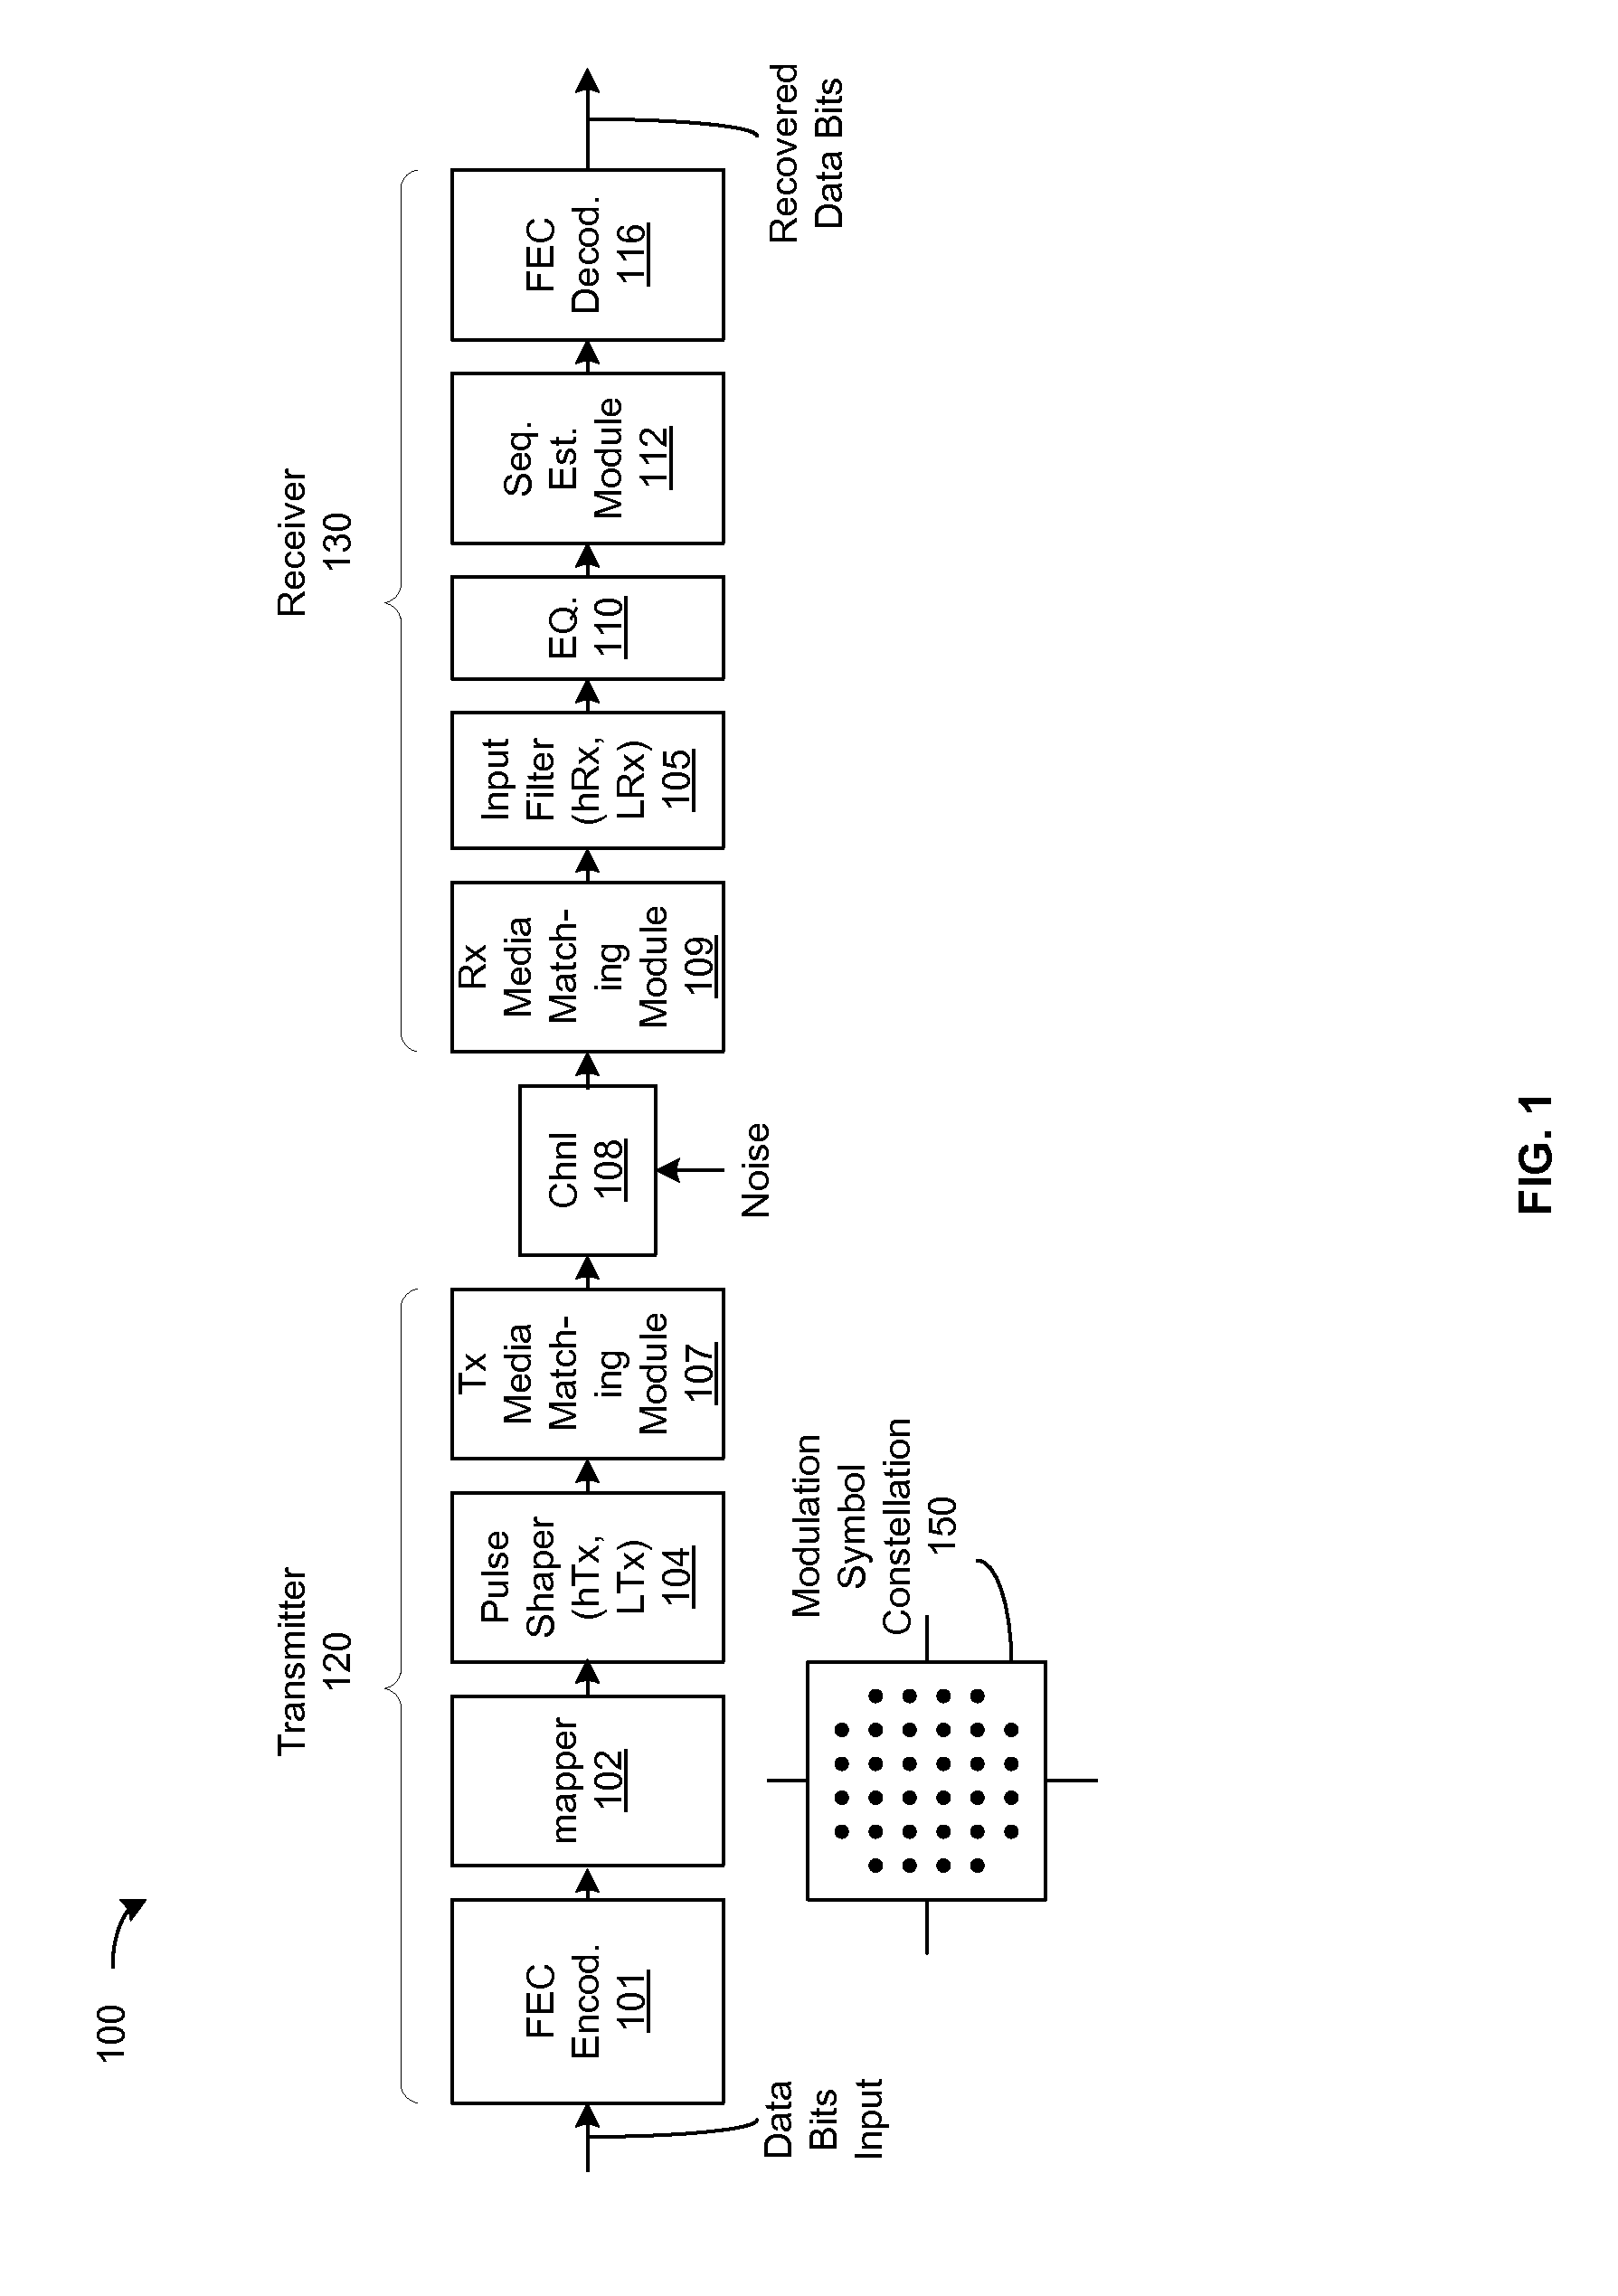 Reduced state sequence estimation with soft decision outputs